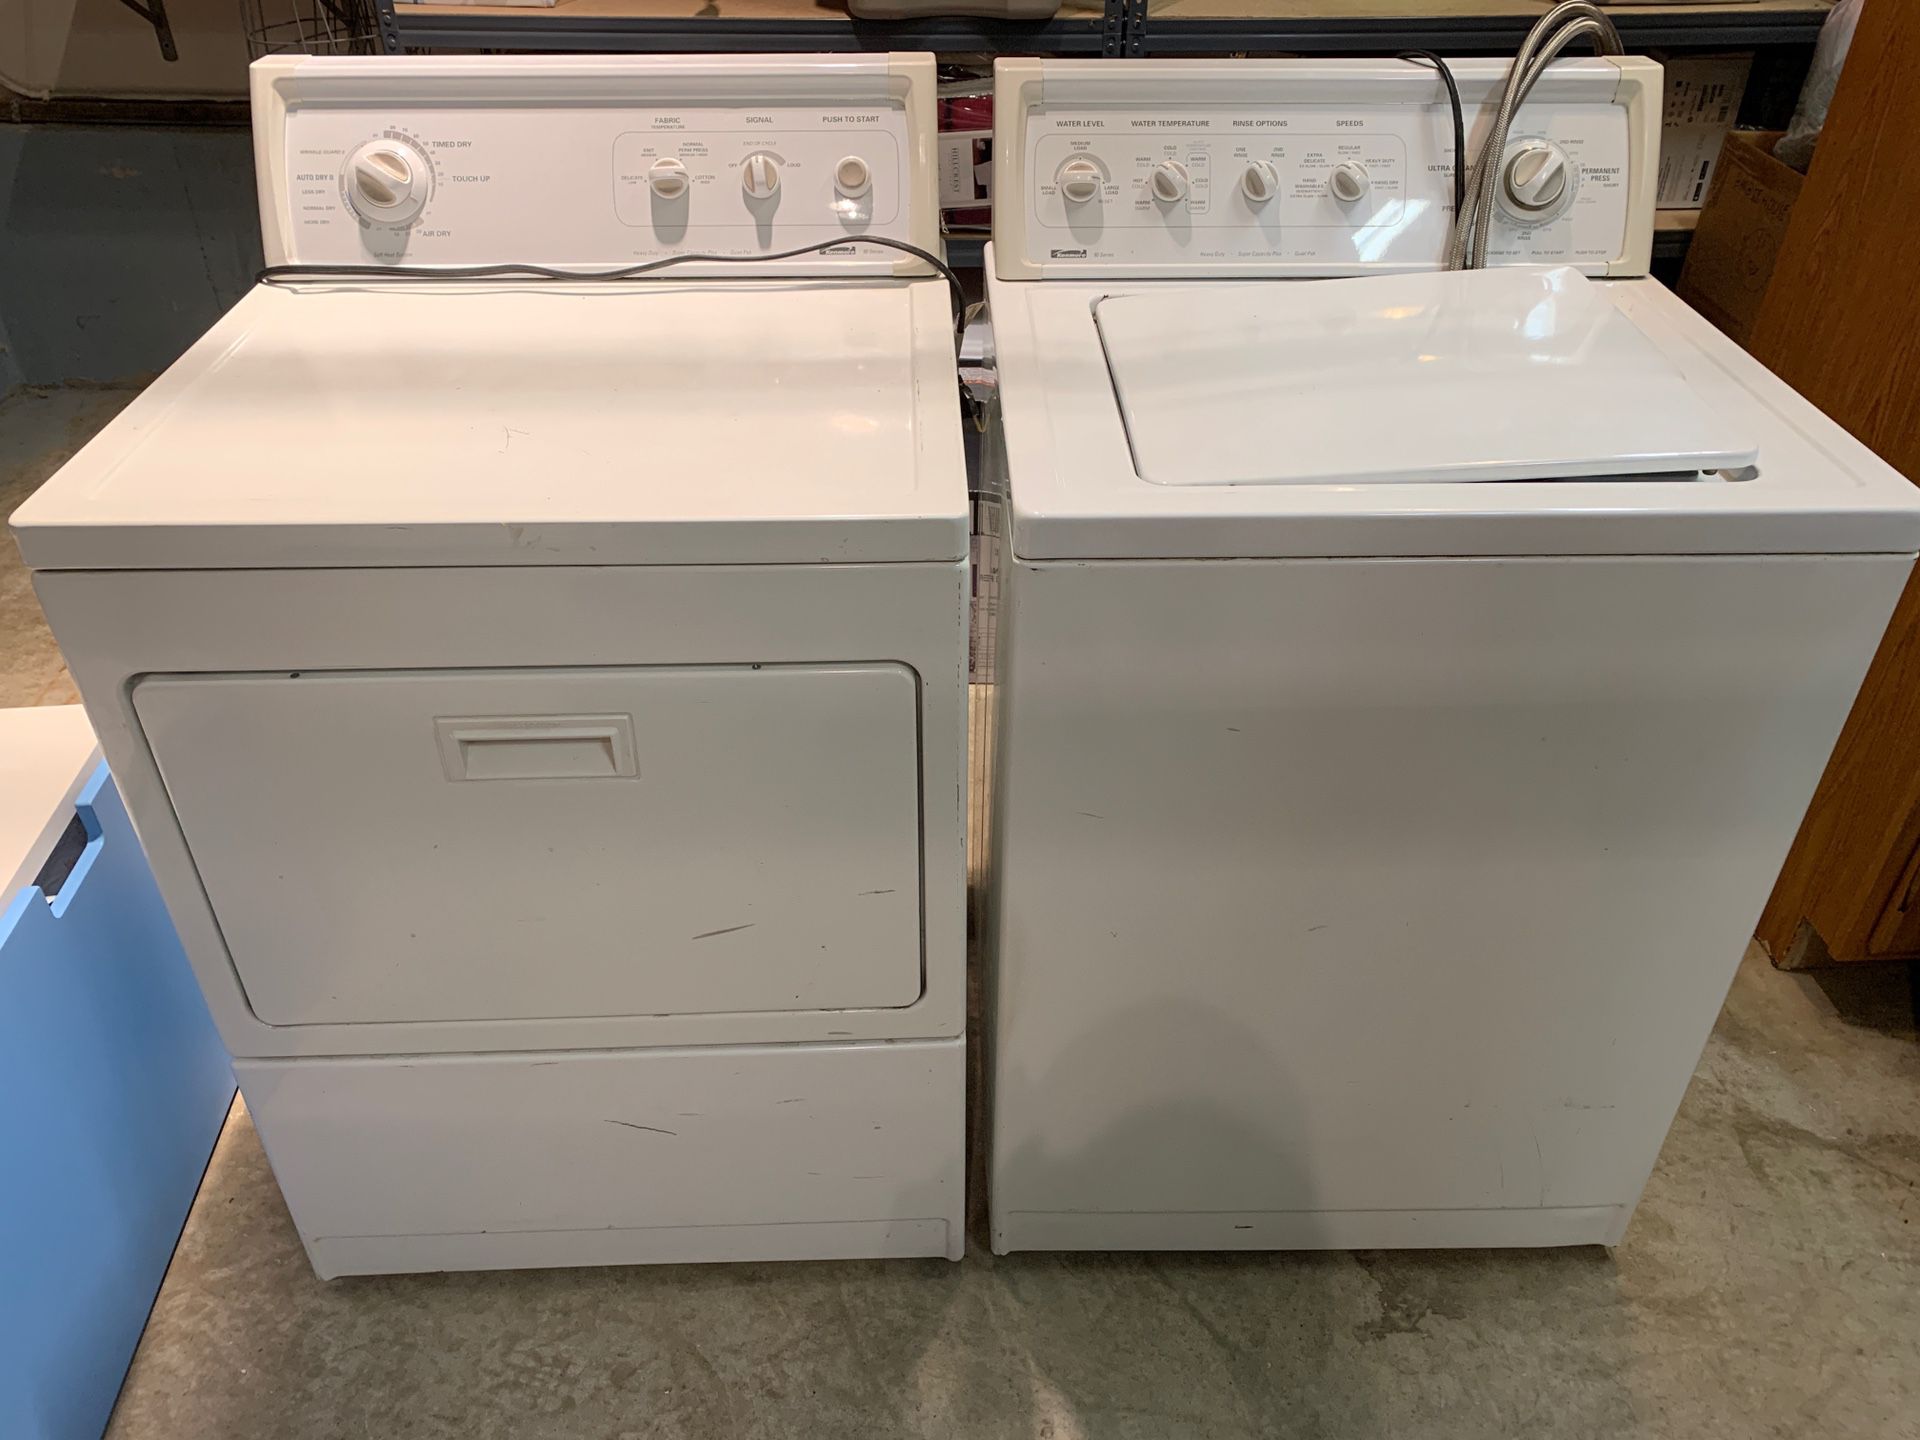 Kenmore washer and dryer used - works great!